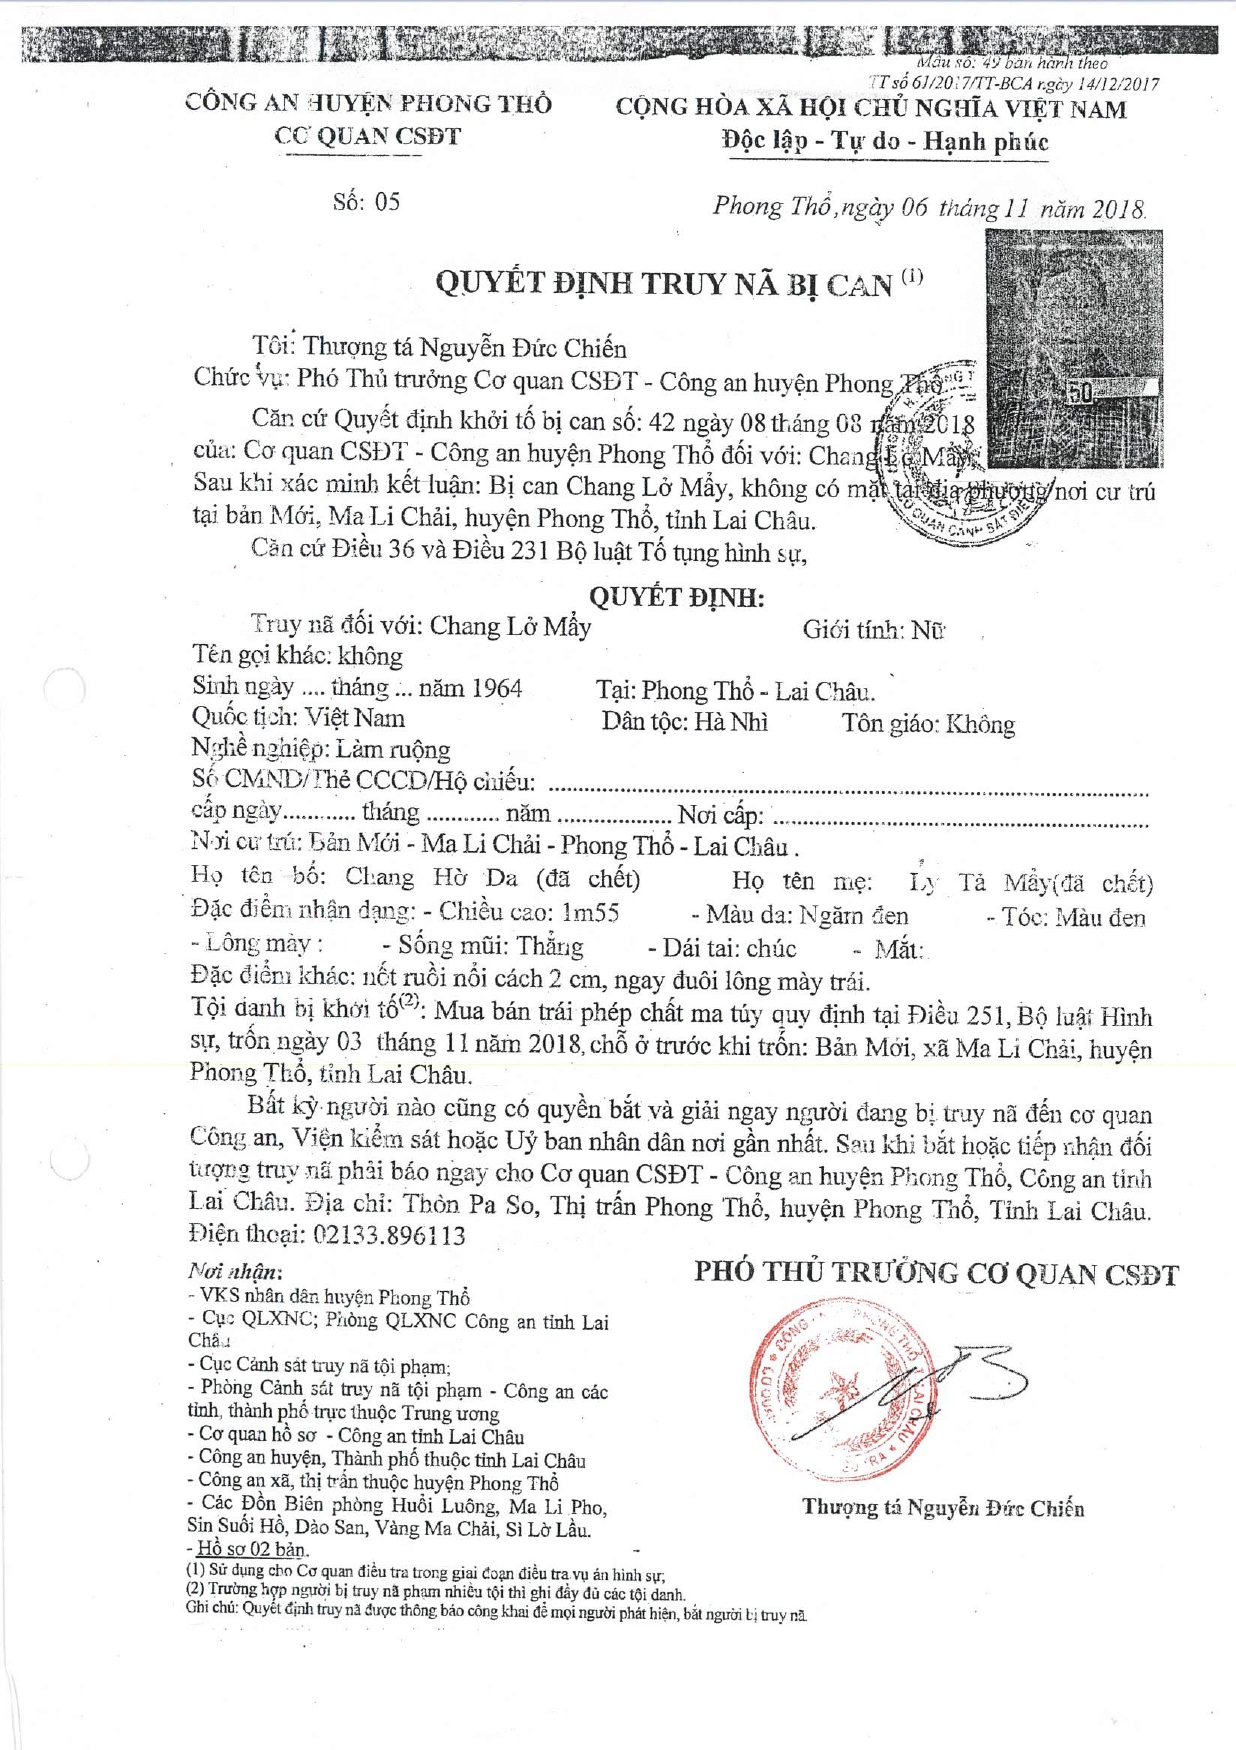 Chang Lở Mẩy page 0001